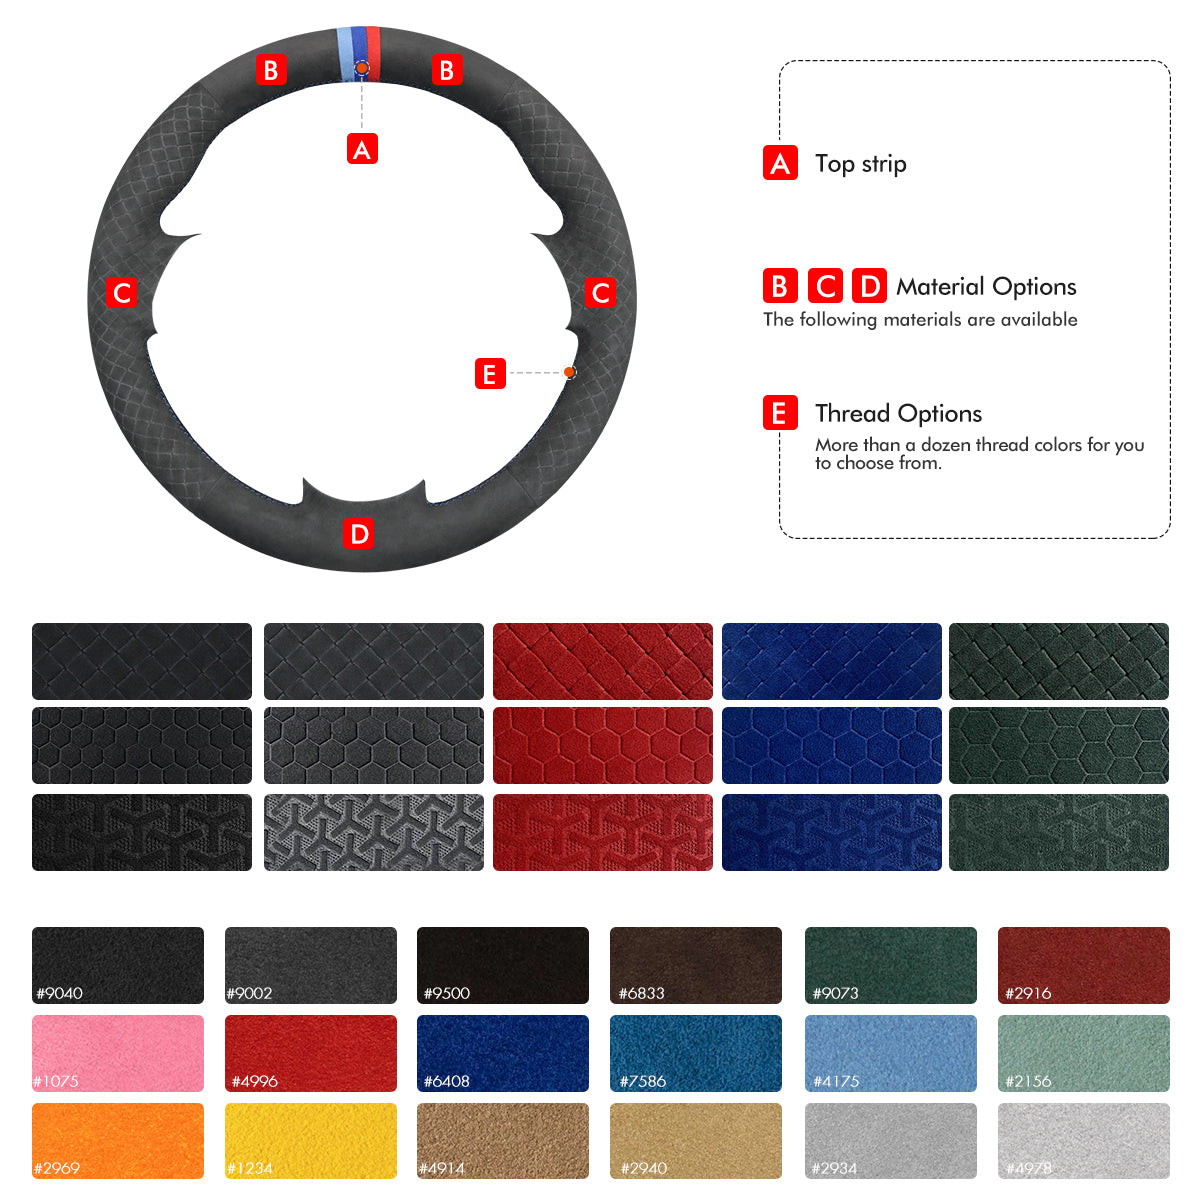 MEWANT Hand Stitch Car Steering Wheel Cover for Ford Focus 2011-2014 / C-Max (Grand C-Max) 2010-2015 / Kuga 2012-2016